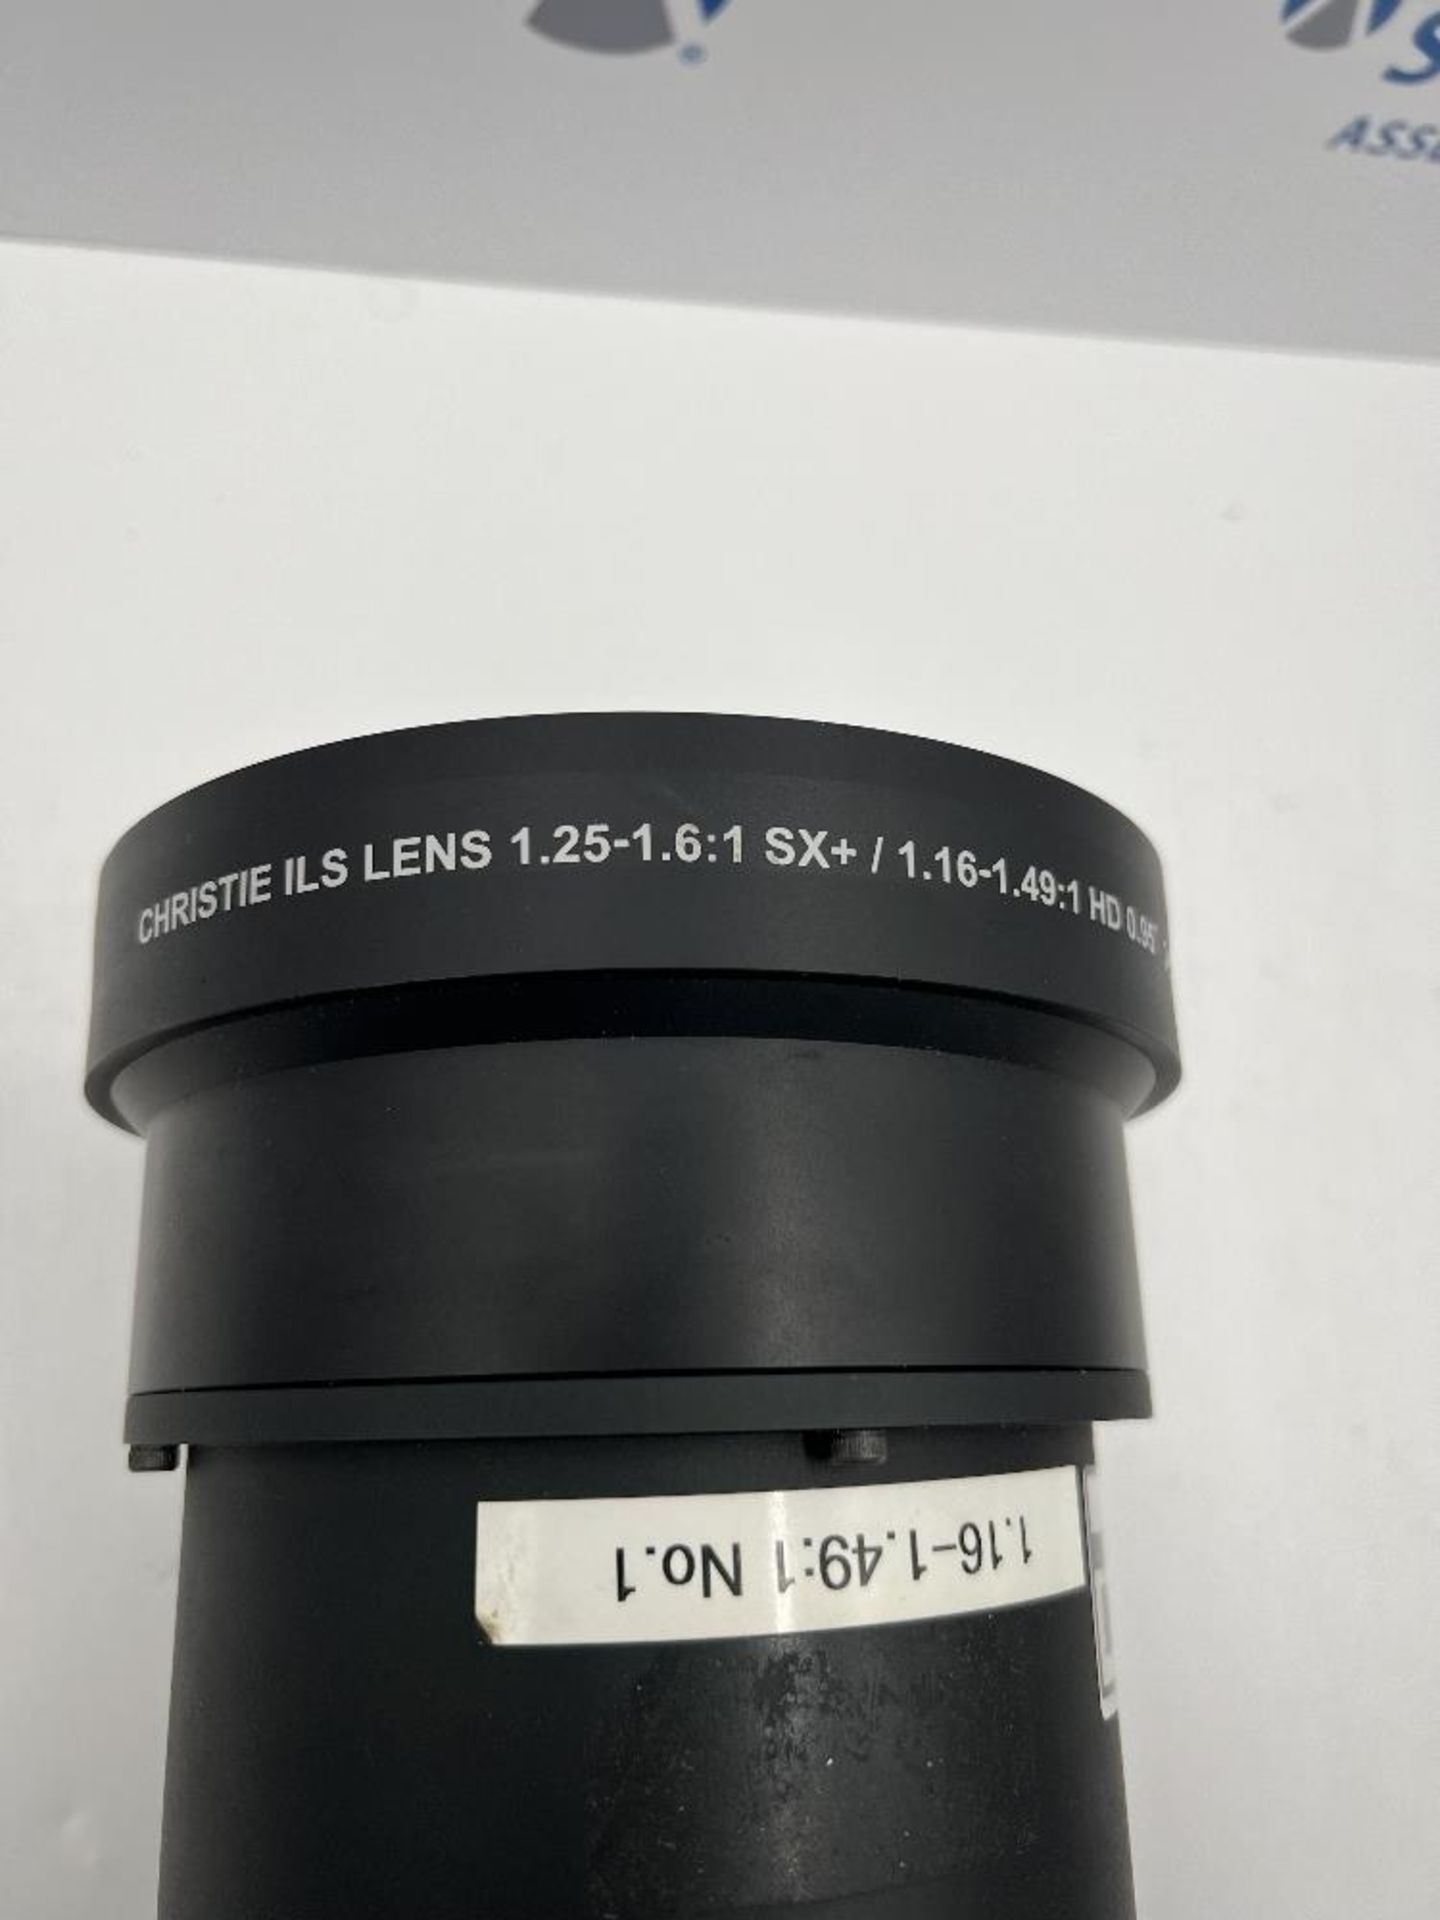 Christie M-Series HD Lens 1.16 - 1.49 With Peli Case - Image 7 of 11